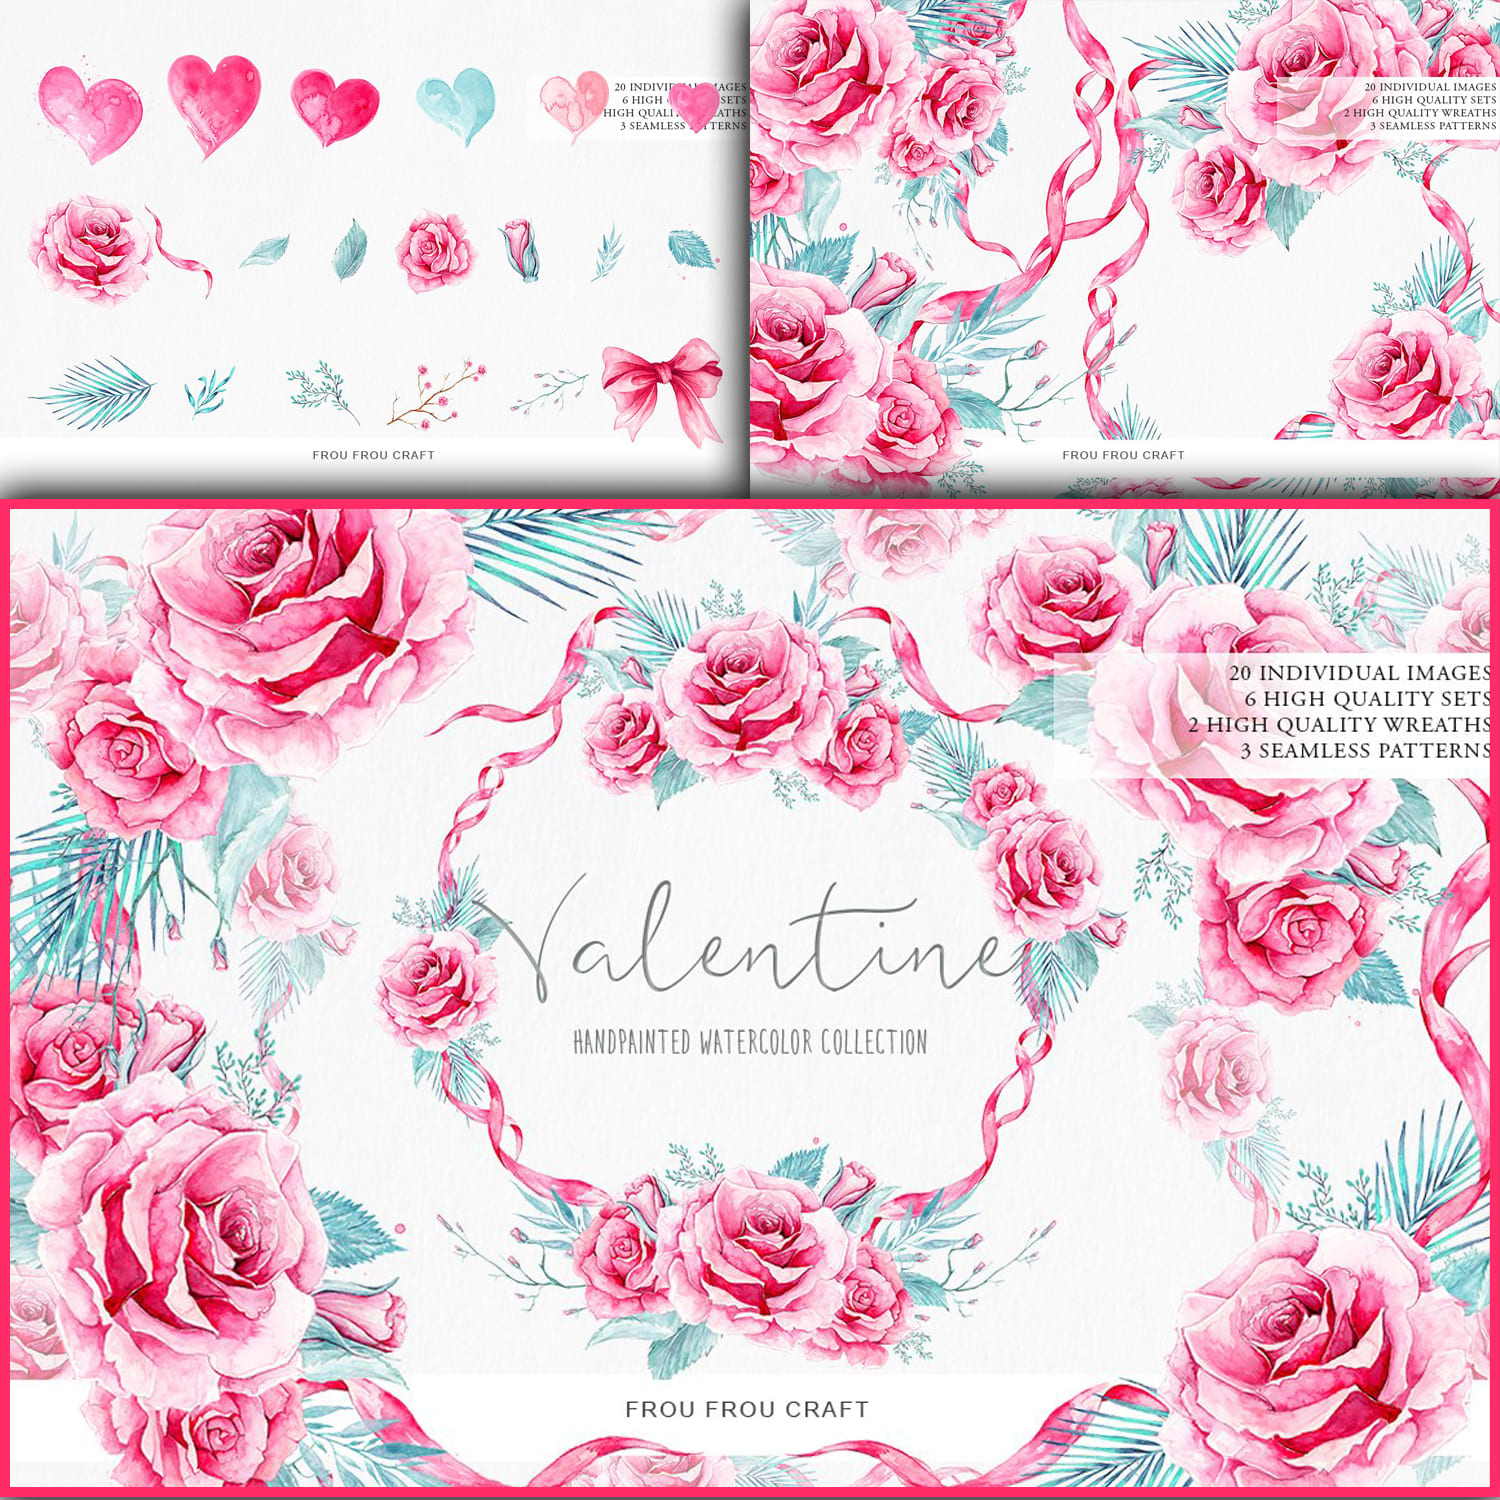 2 high quality wreaths of Valentine handpainted watercolor collection.